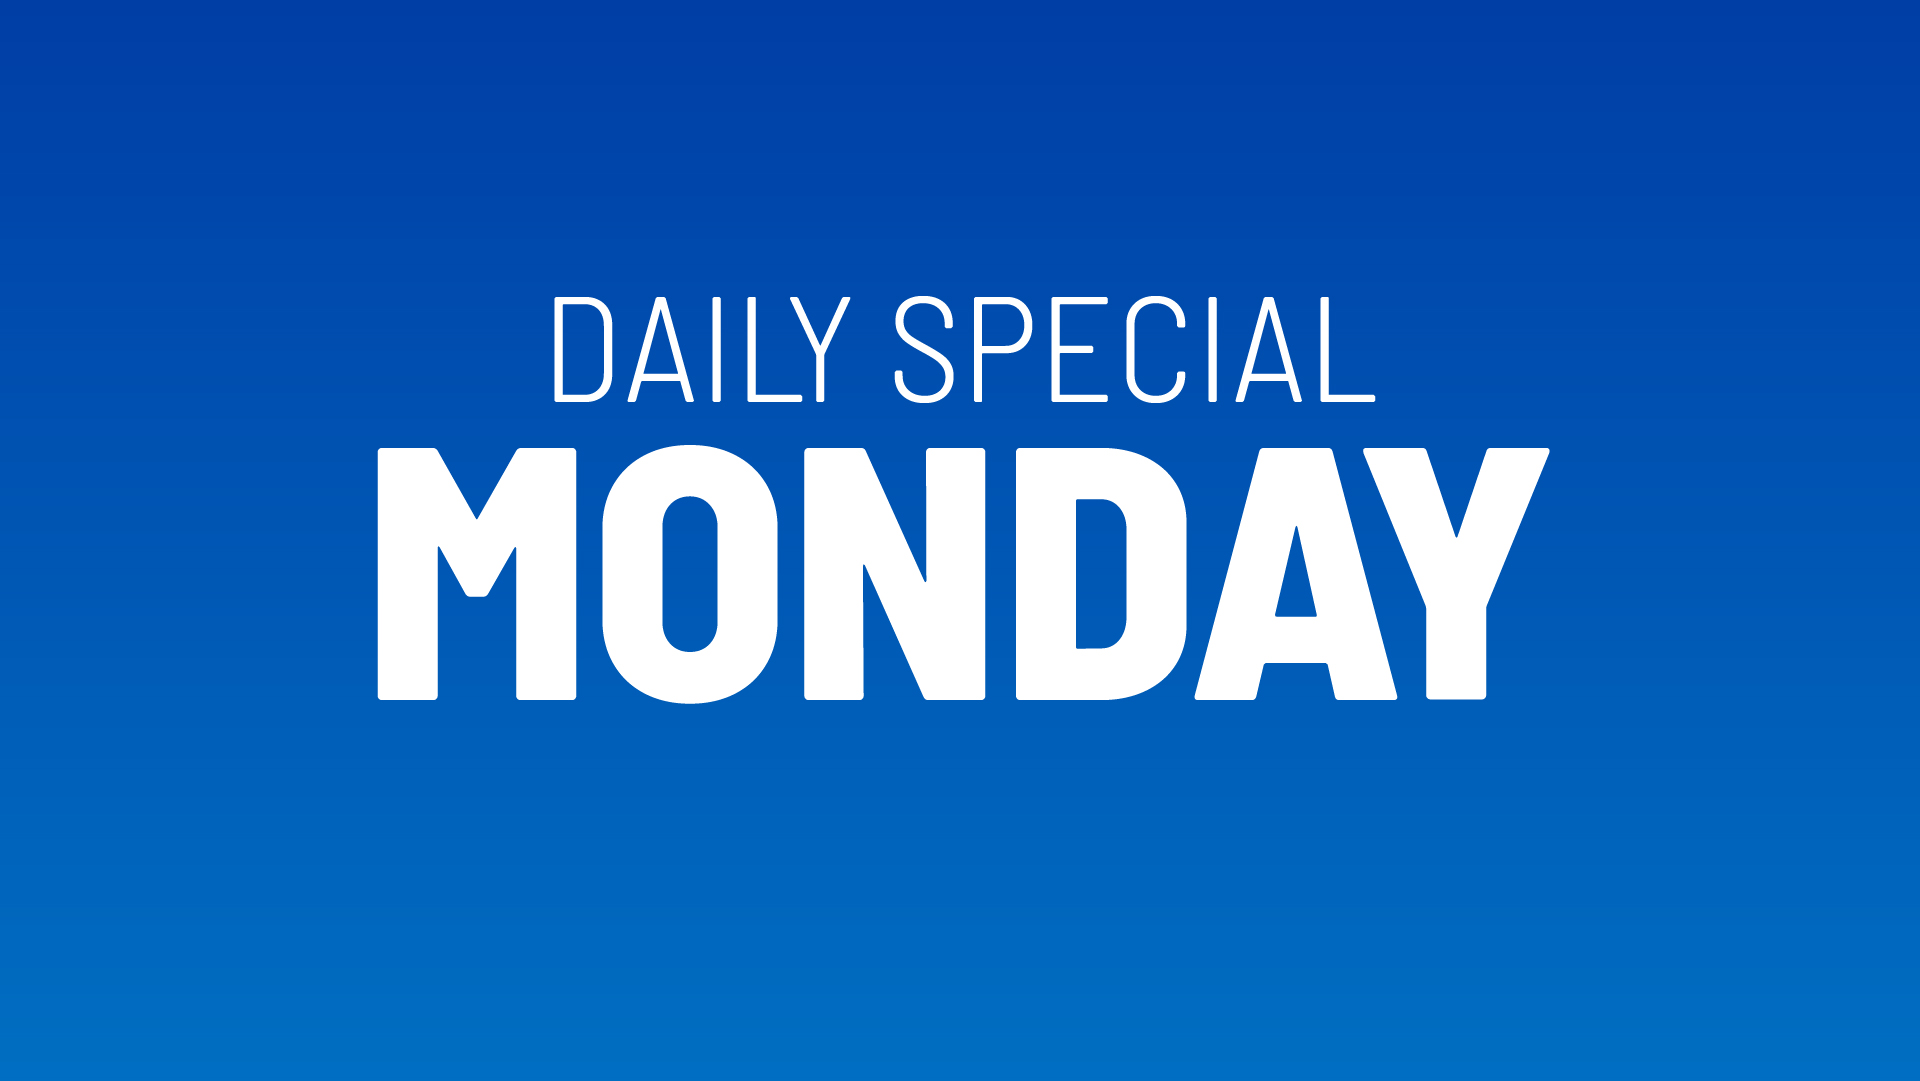 Monday's Daily Special